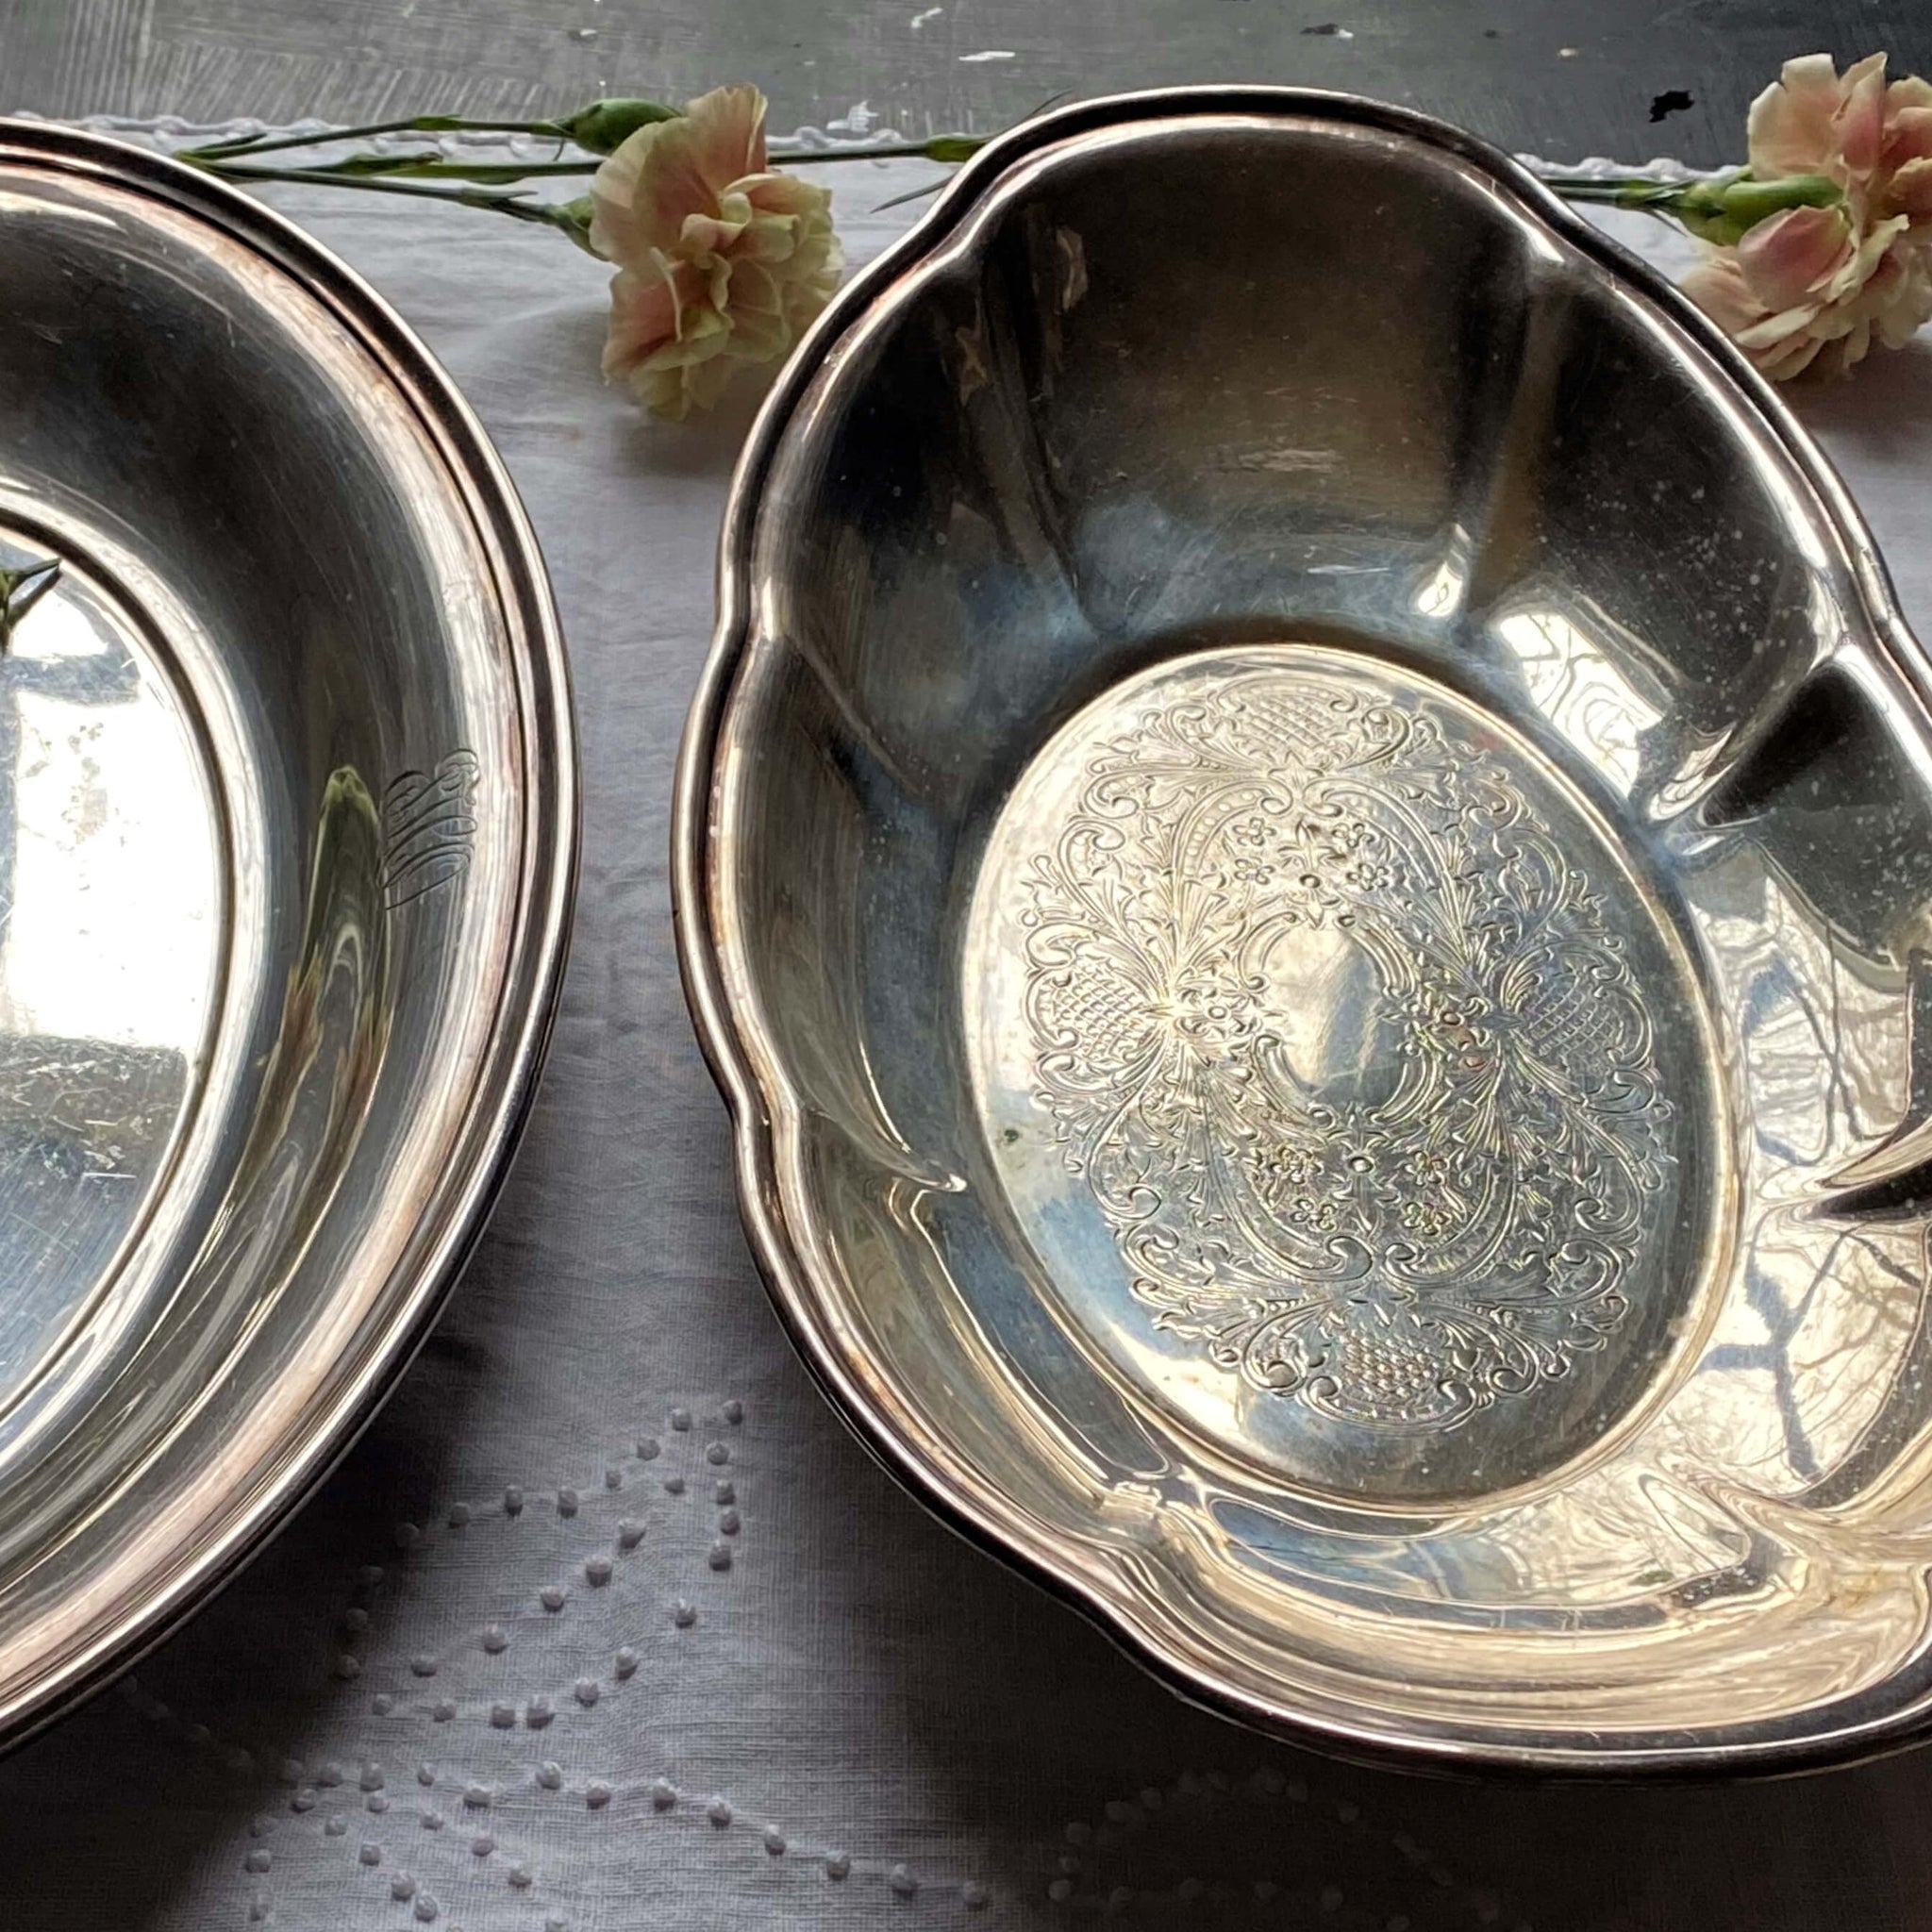 Vintage Silverplate Bread Trays - Mismatched Set of Three by Gorham, Art Silver Co and International Silver circa 1920s-1950s